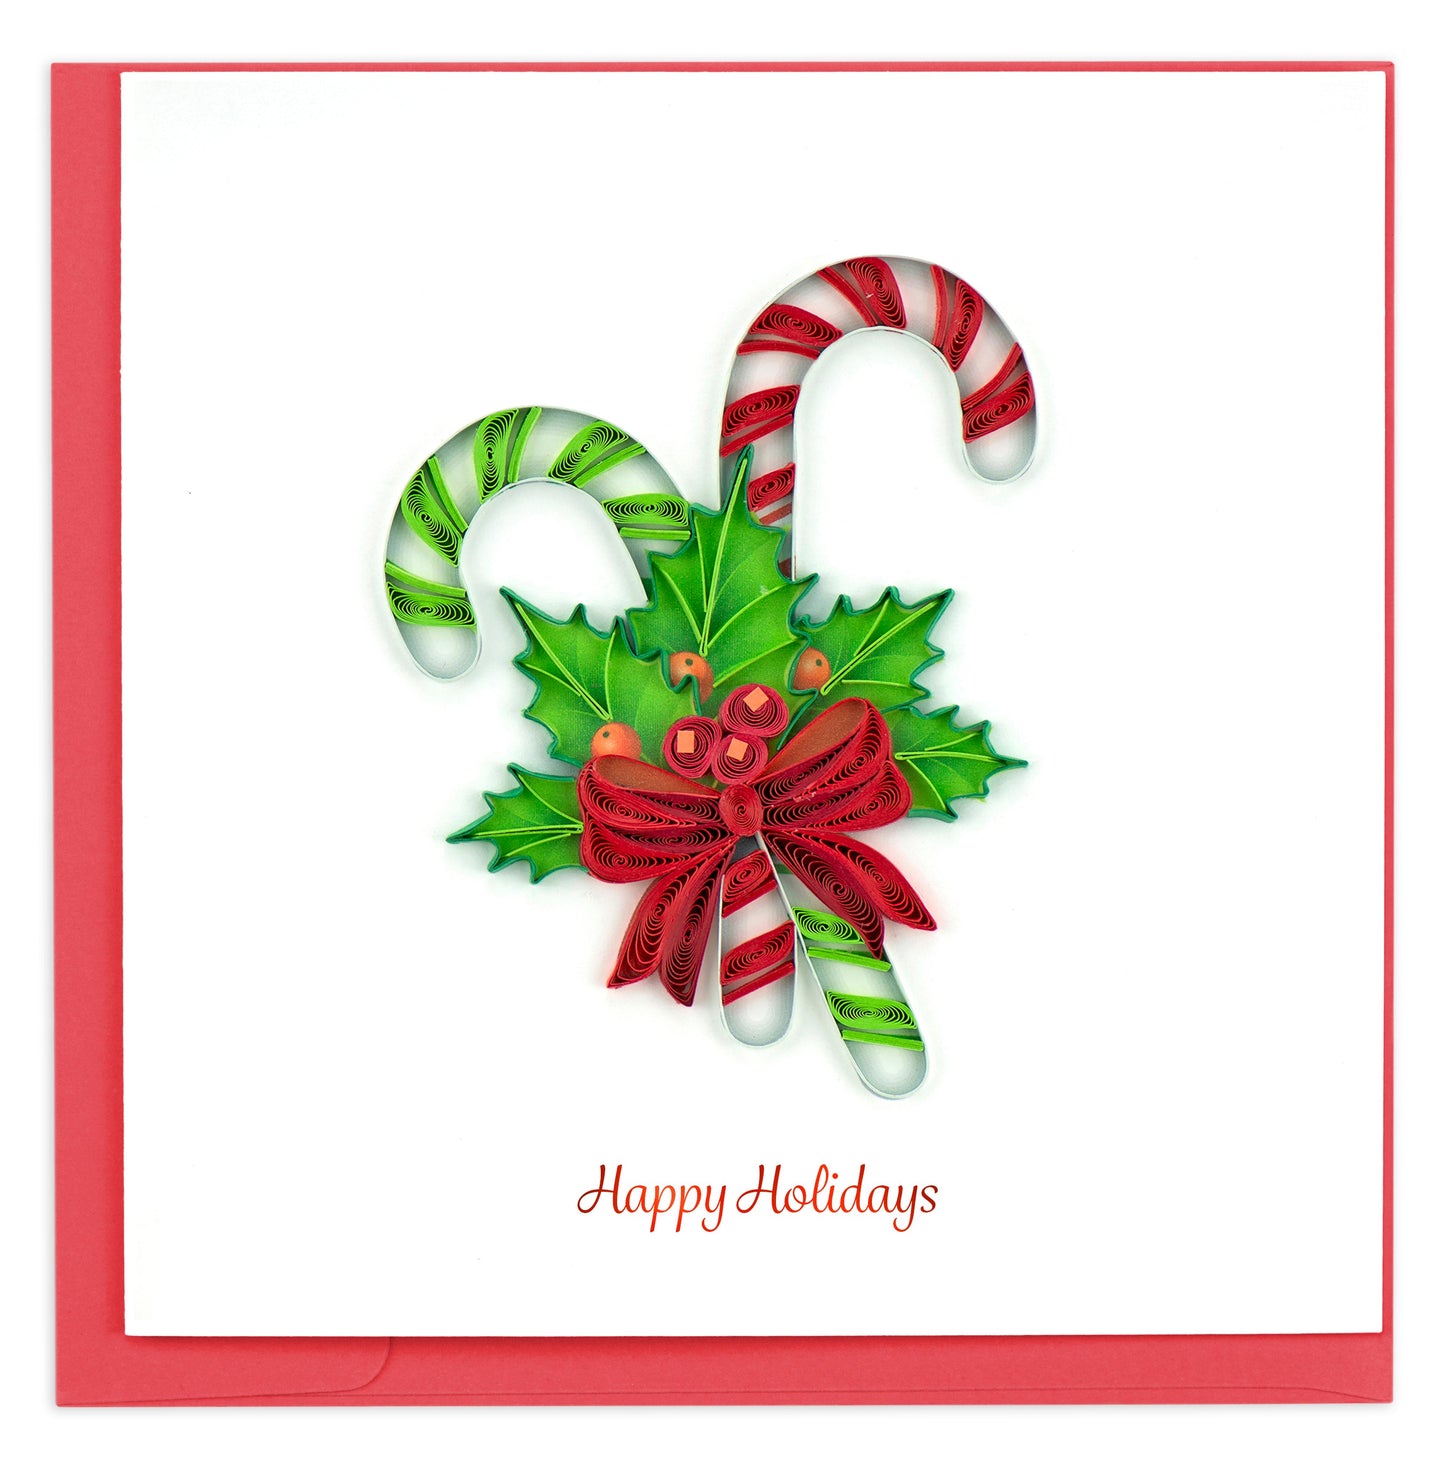 Quilled Candy Canes "Happy Holidays" Card